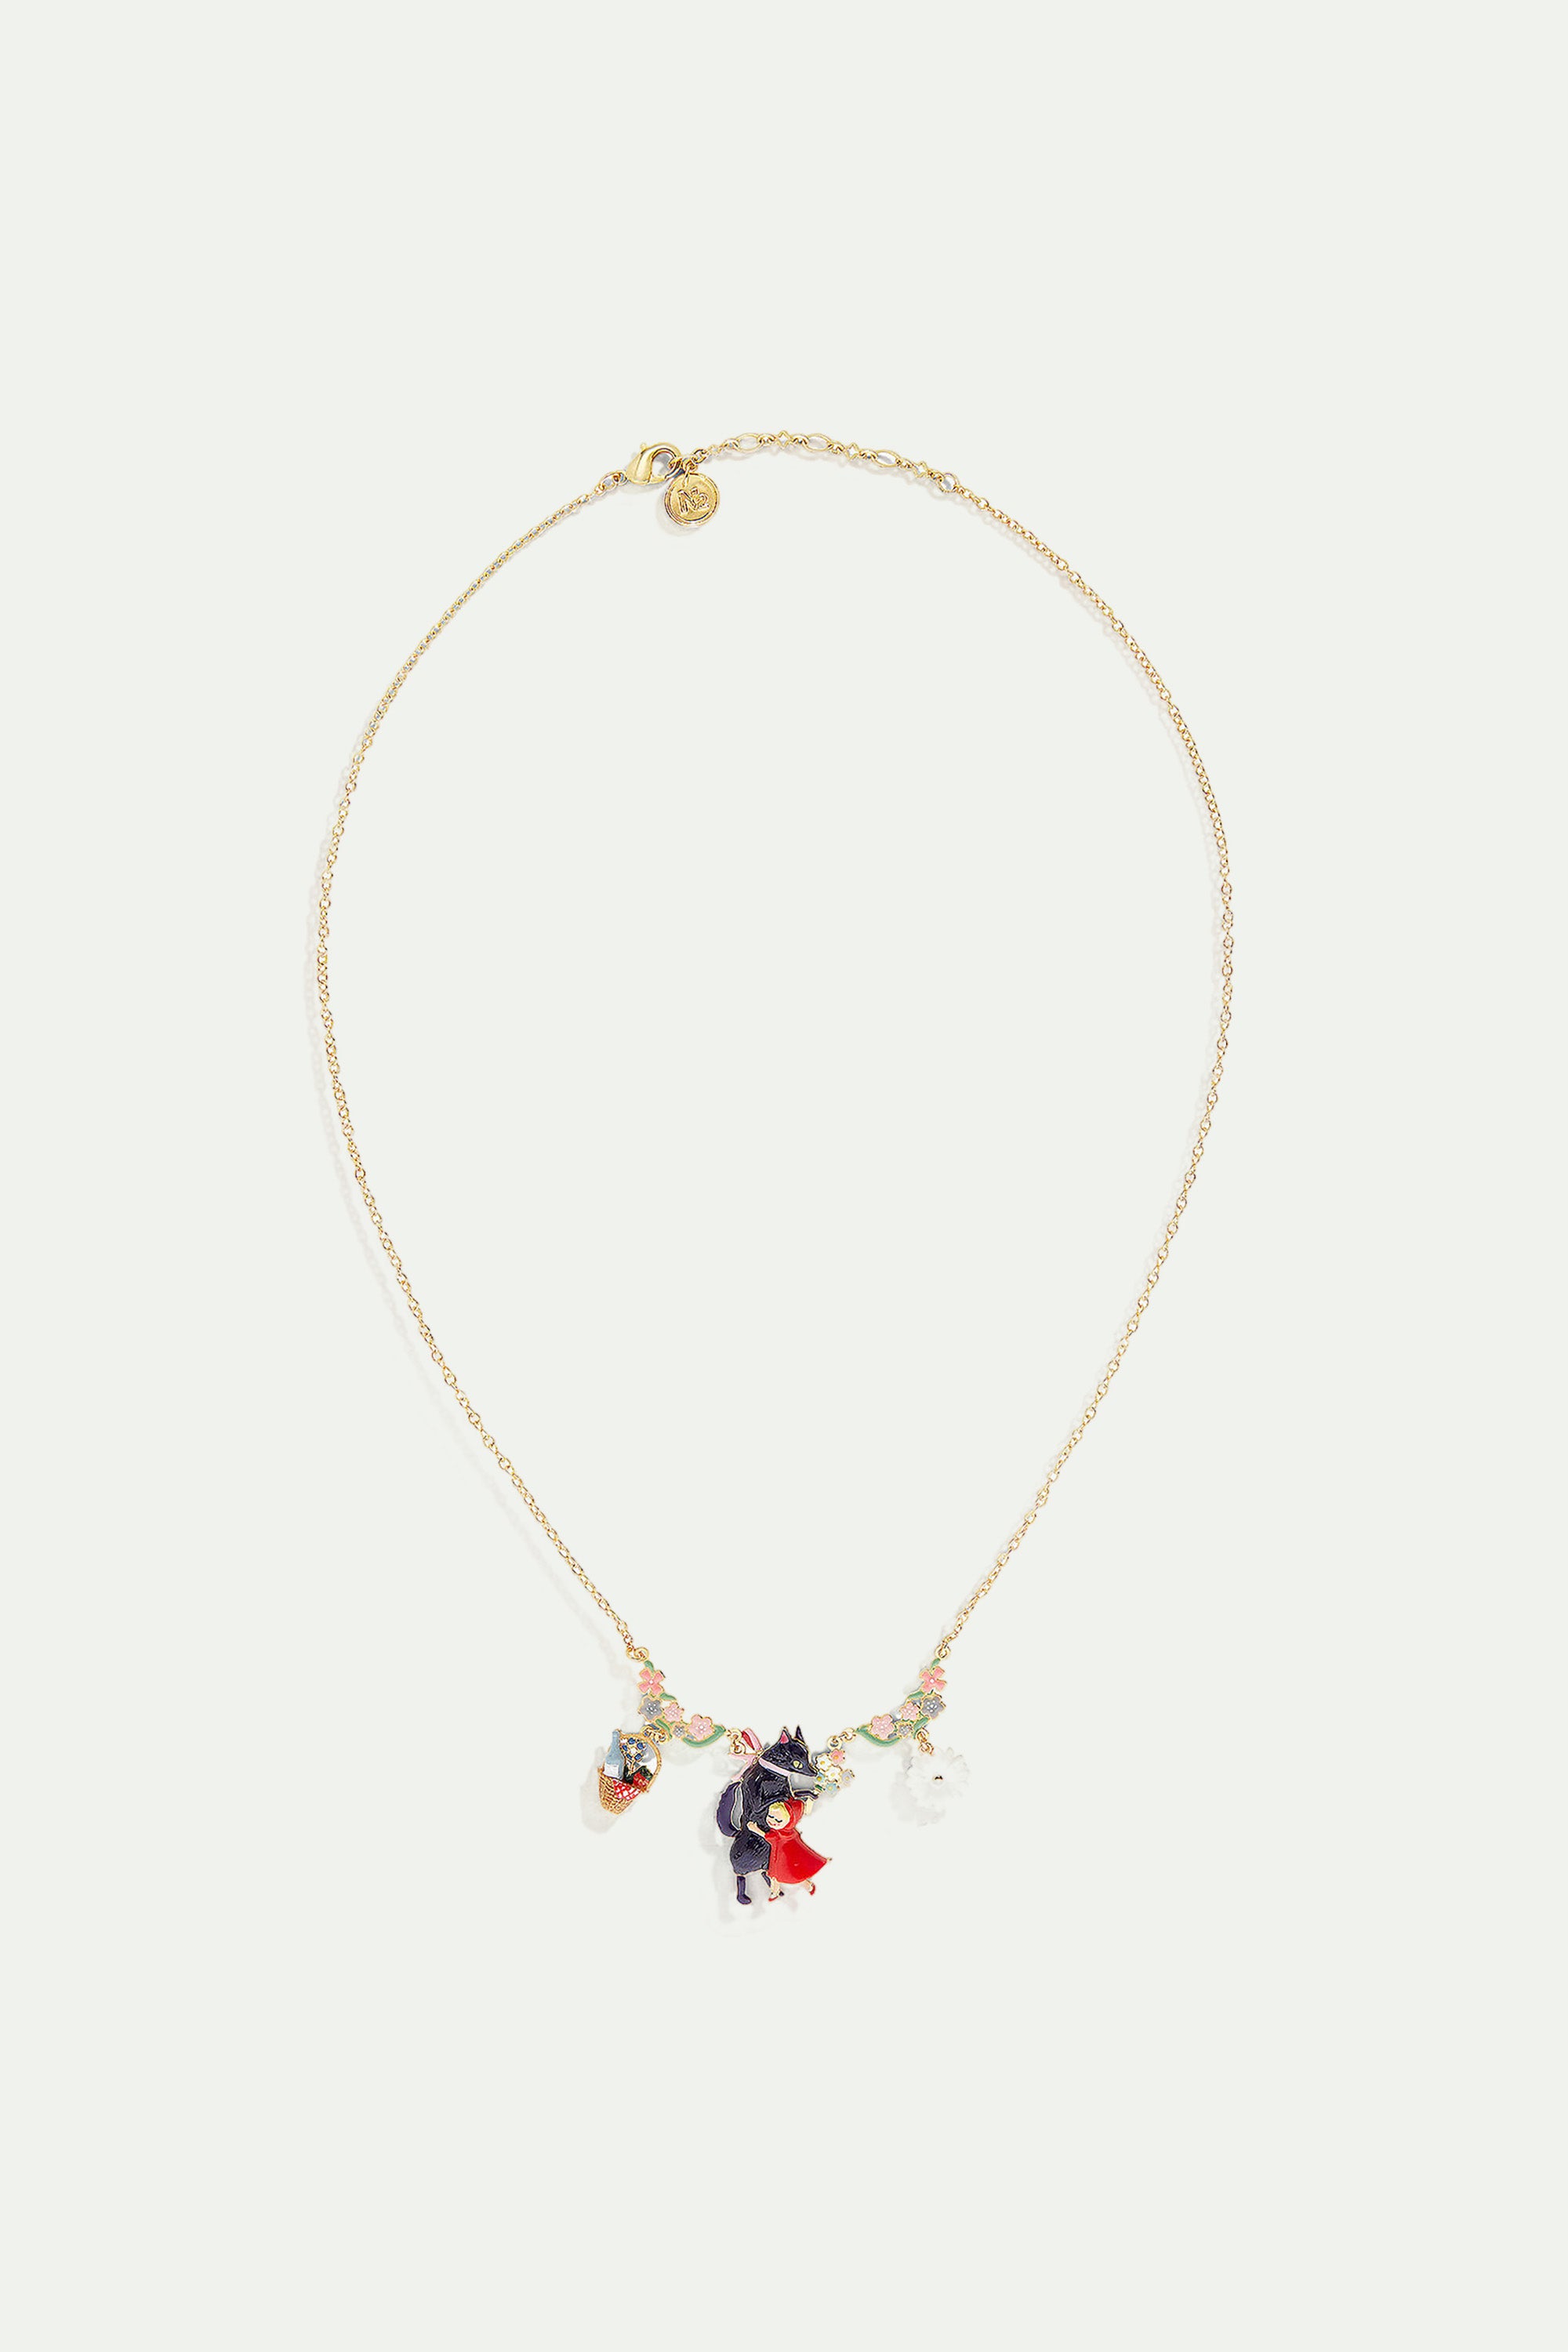 Flowery Big Bad Wolf and Little Red Riding Hood statement necklace